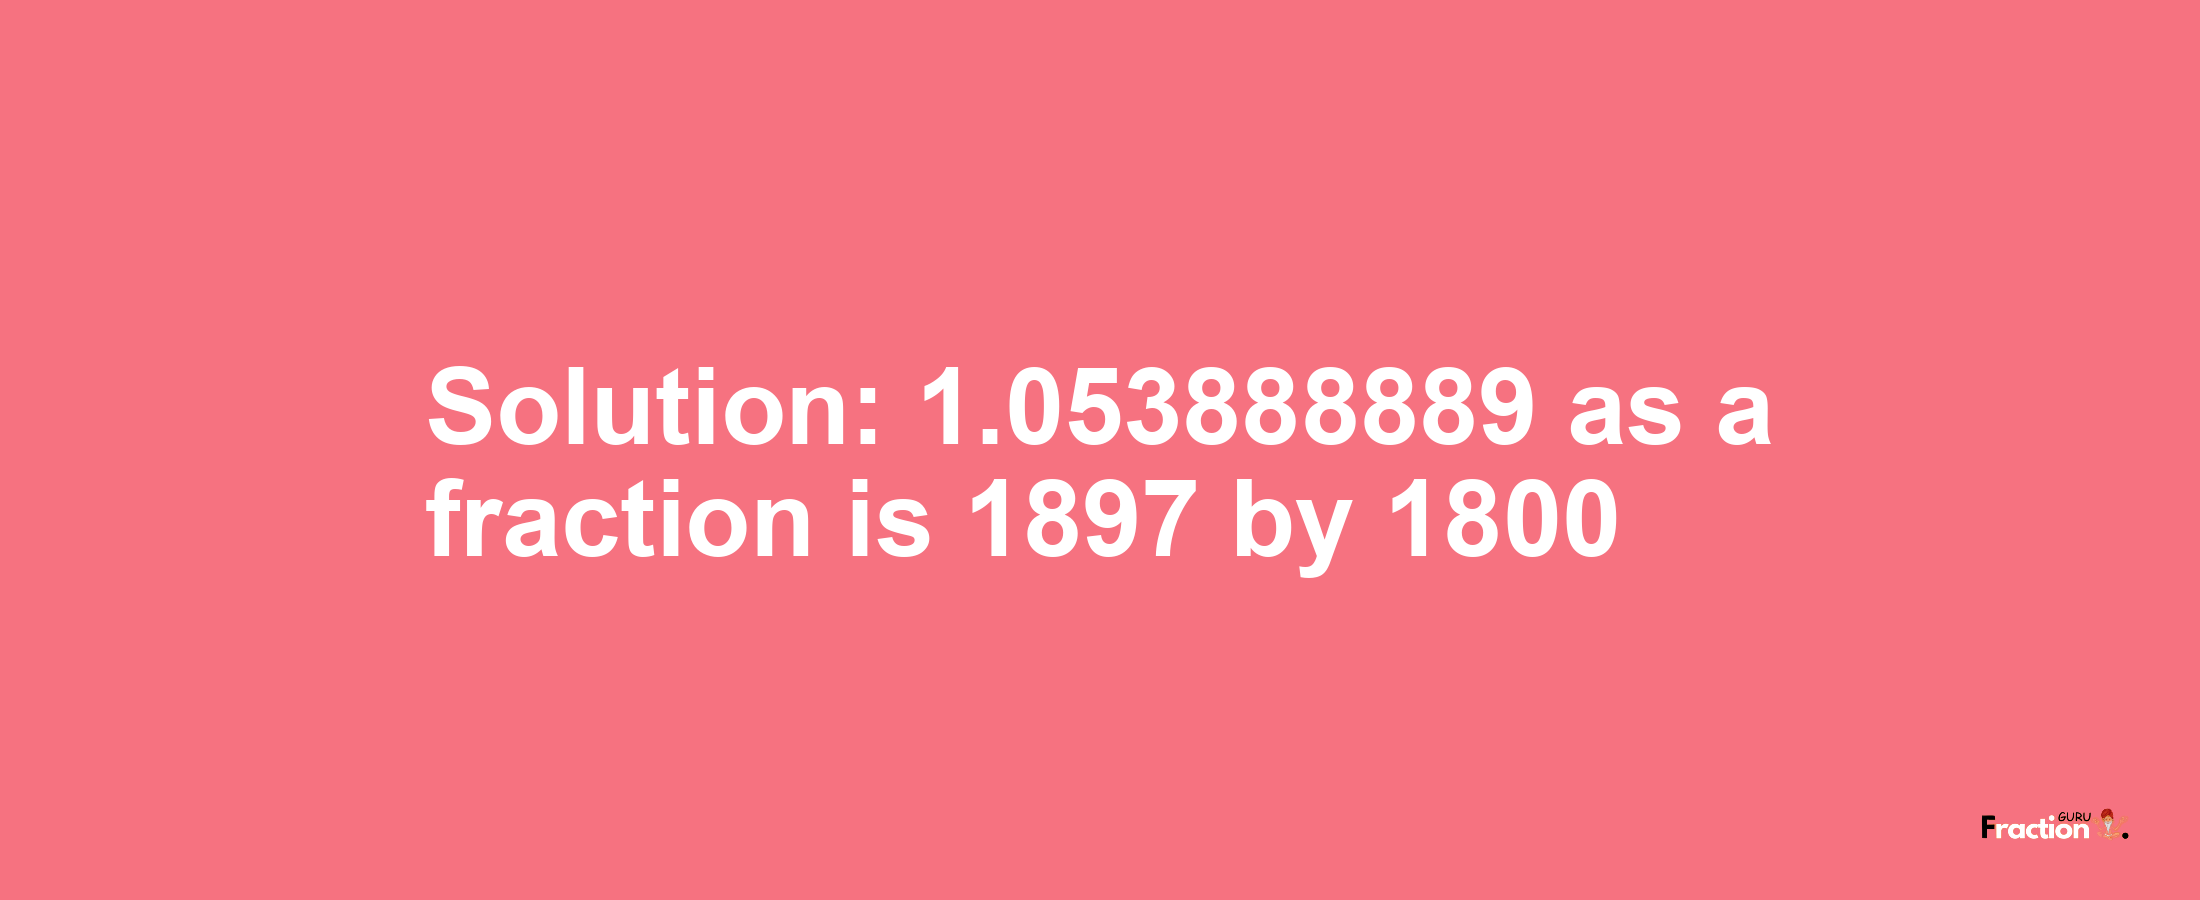 Solution:1.053888889 as a fraction is 1897/1800